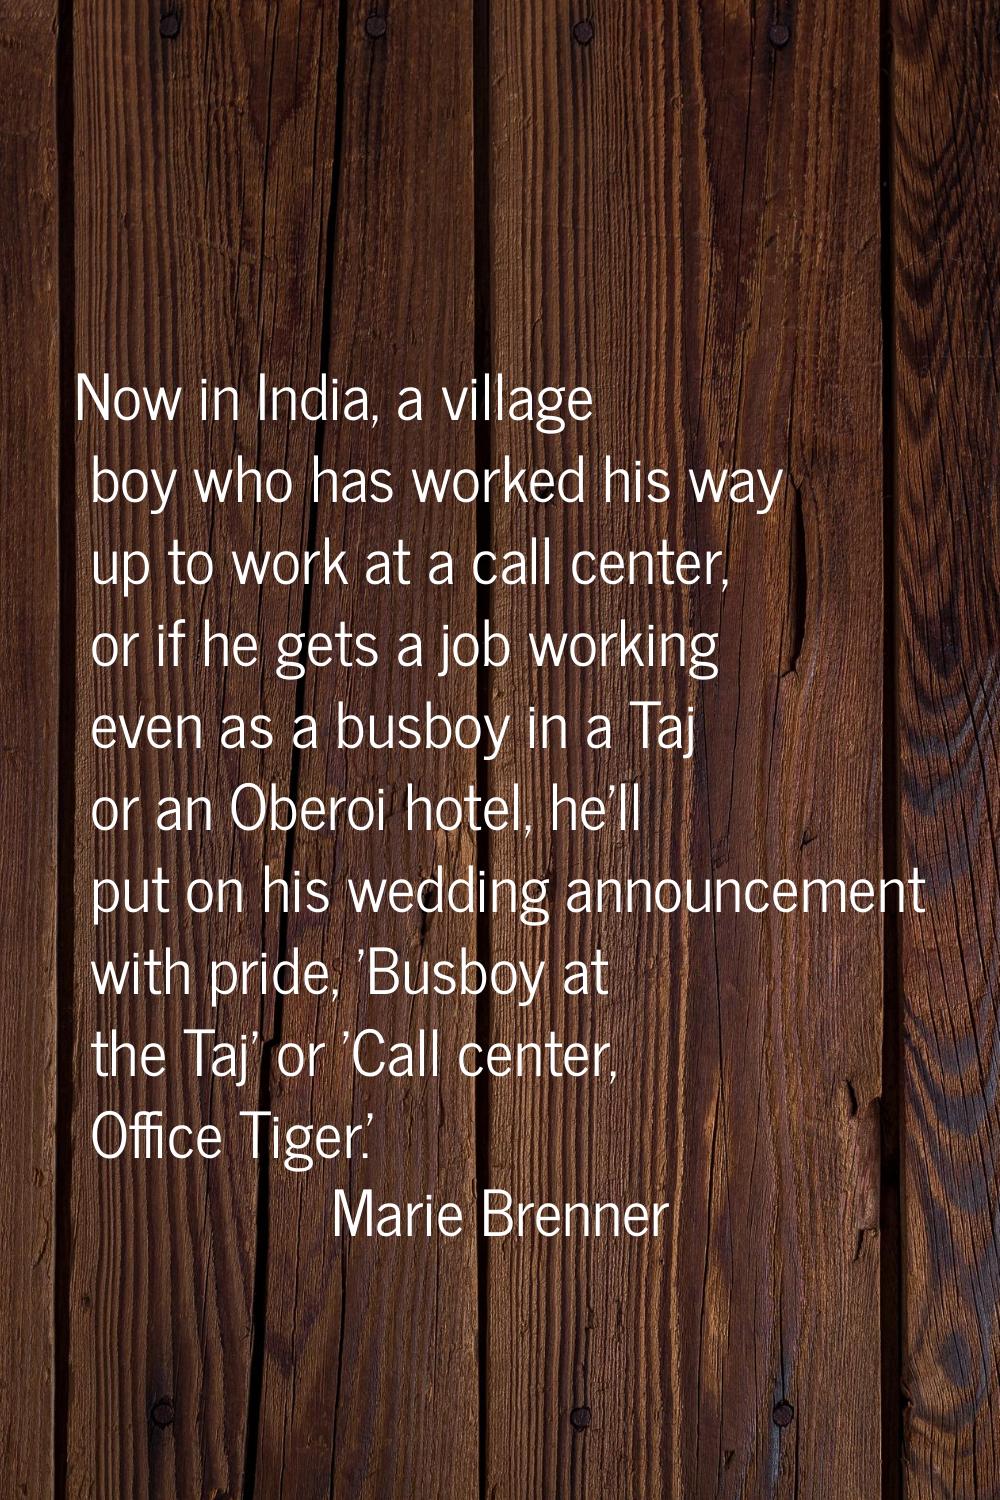 Now in India, a village boy who has worked his way up to work at a call center, or if he gets a job